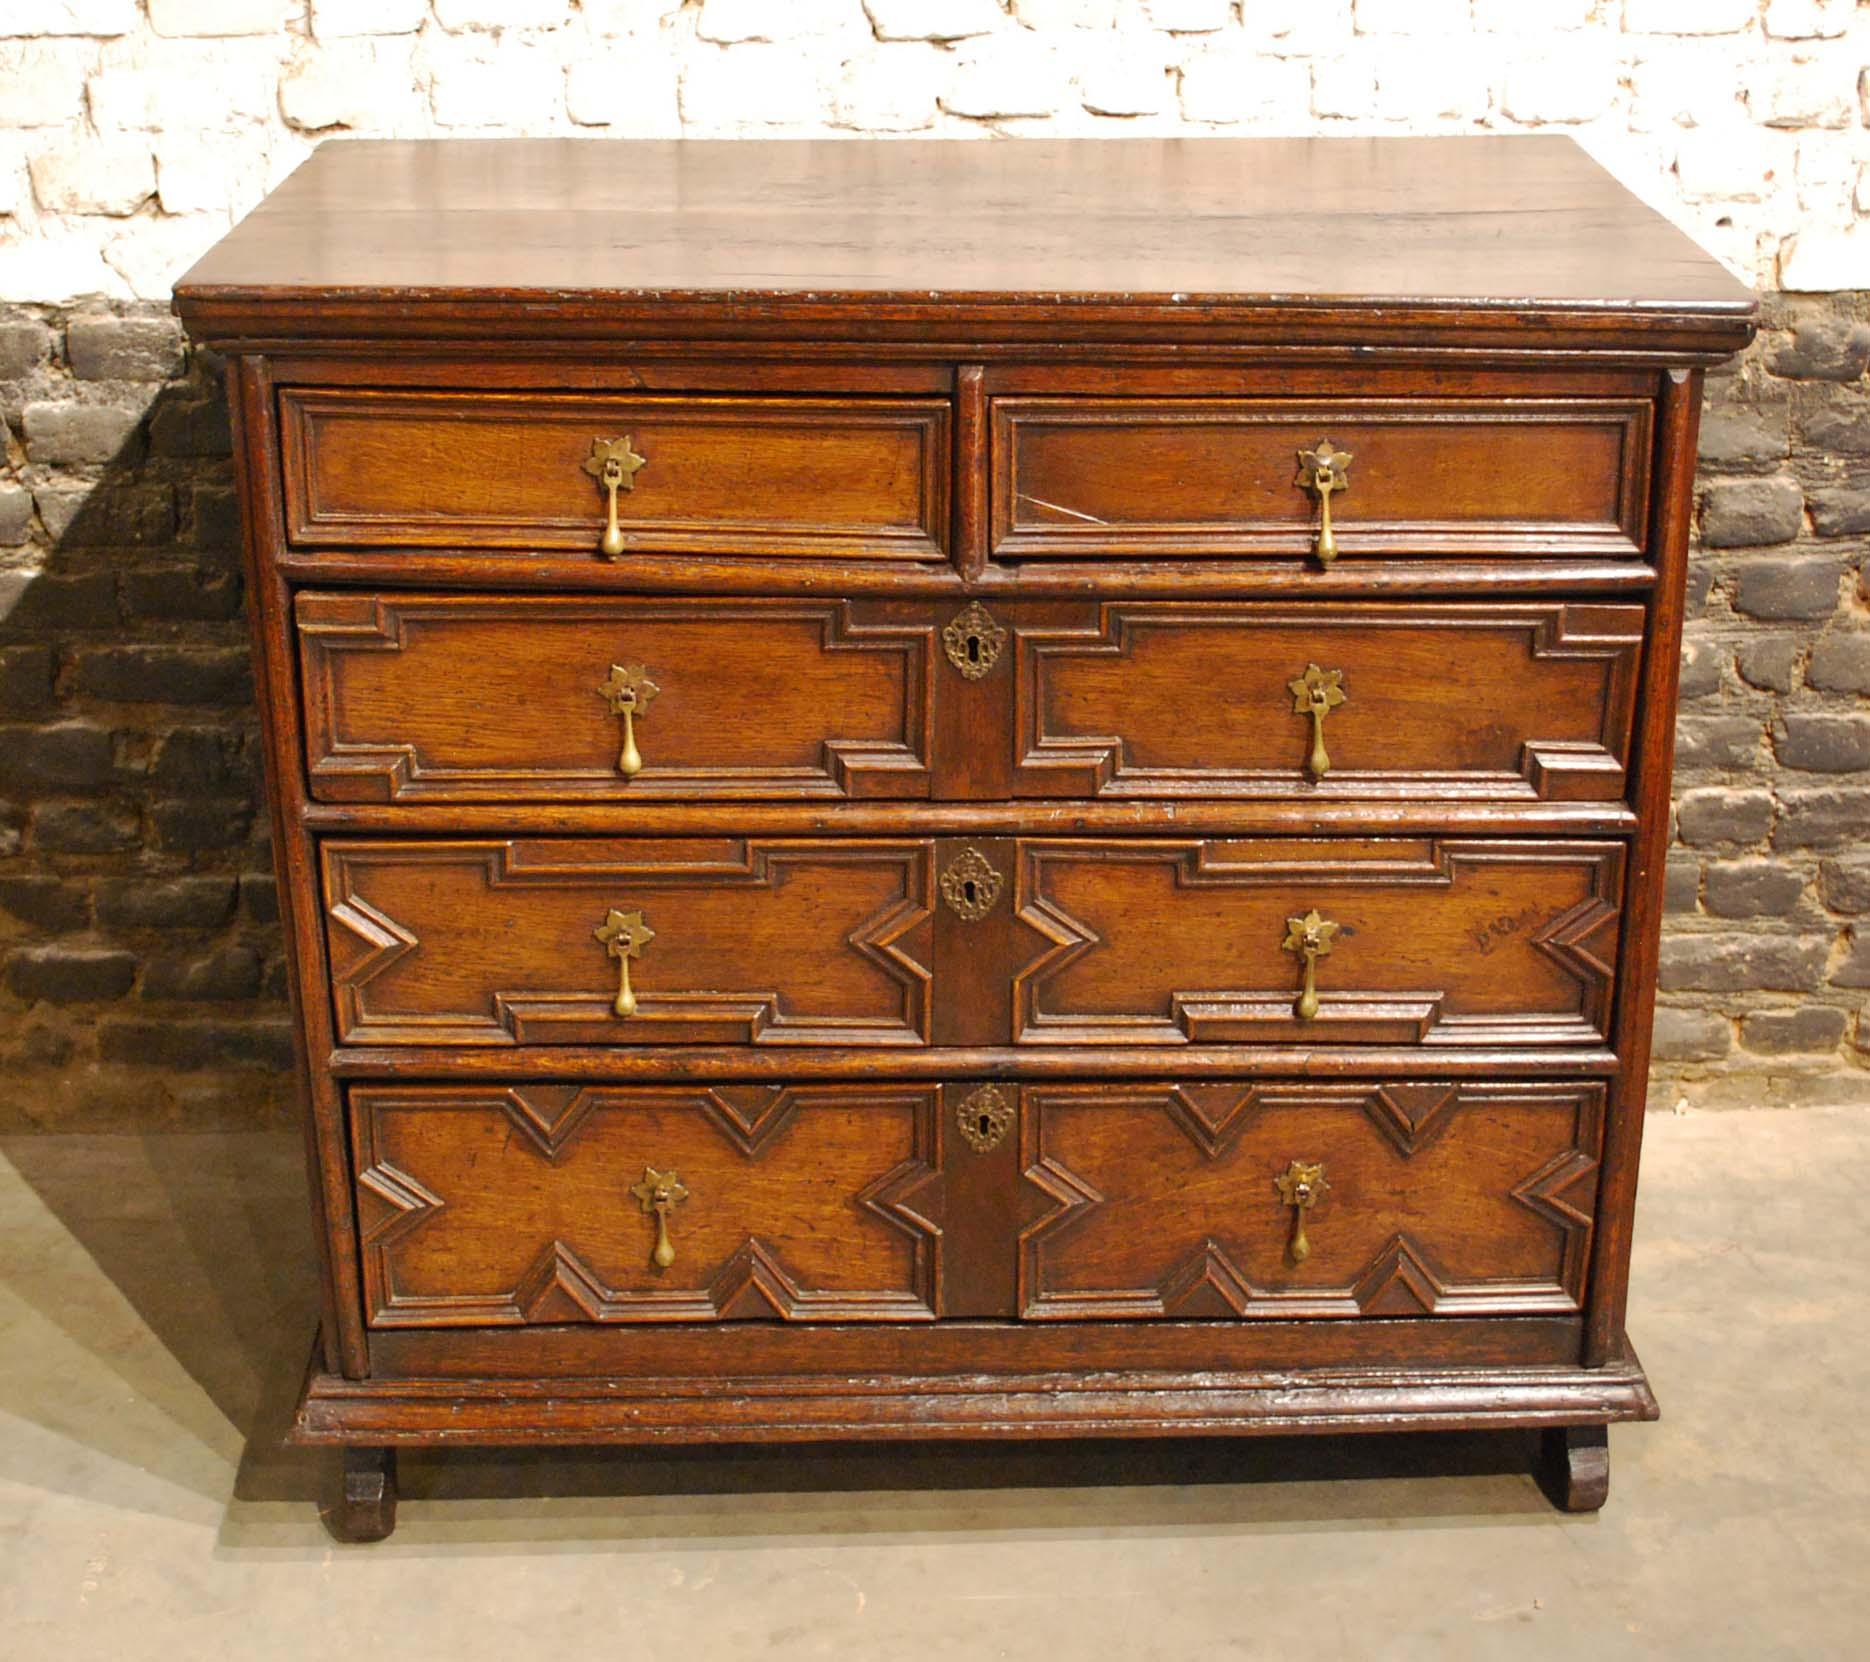 A beautiful chest of drawers made in the finest quality summer oak. The pared-down geometric mouldings are typical for a 17th century Charles II chest. The top is made from two pieces of oak with a great grain pattern and has a moulded edge. The